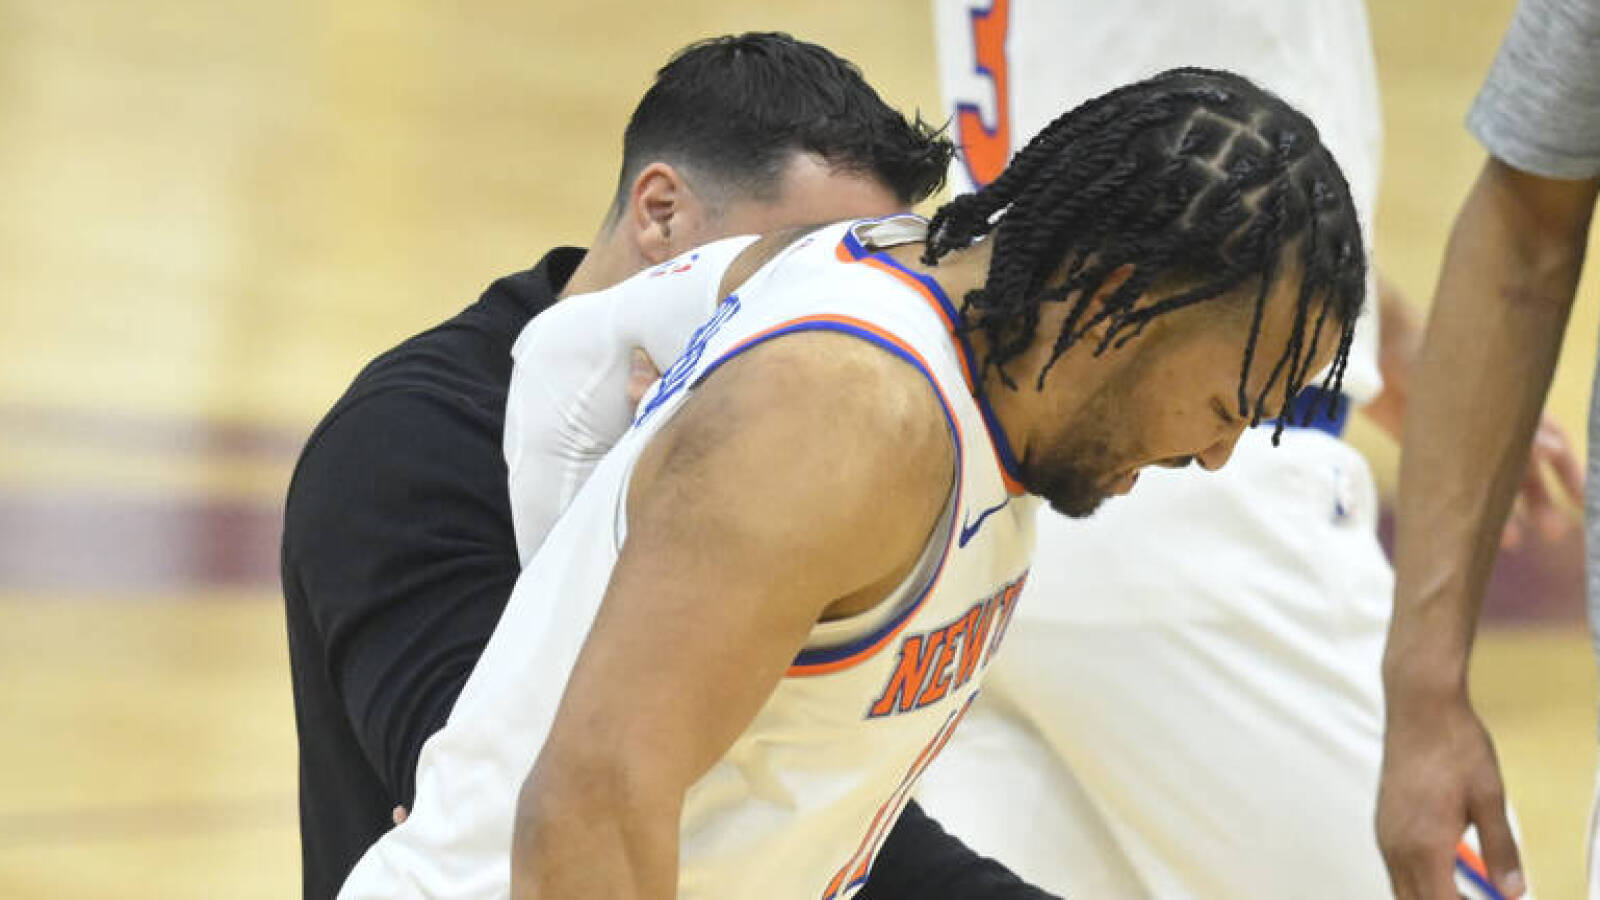 Watch: Knicks star gets injured on first offensive possession